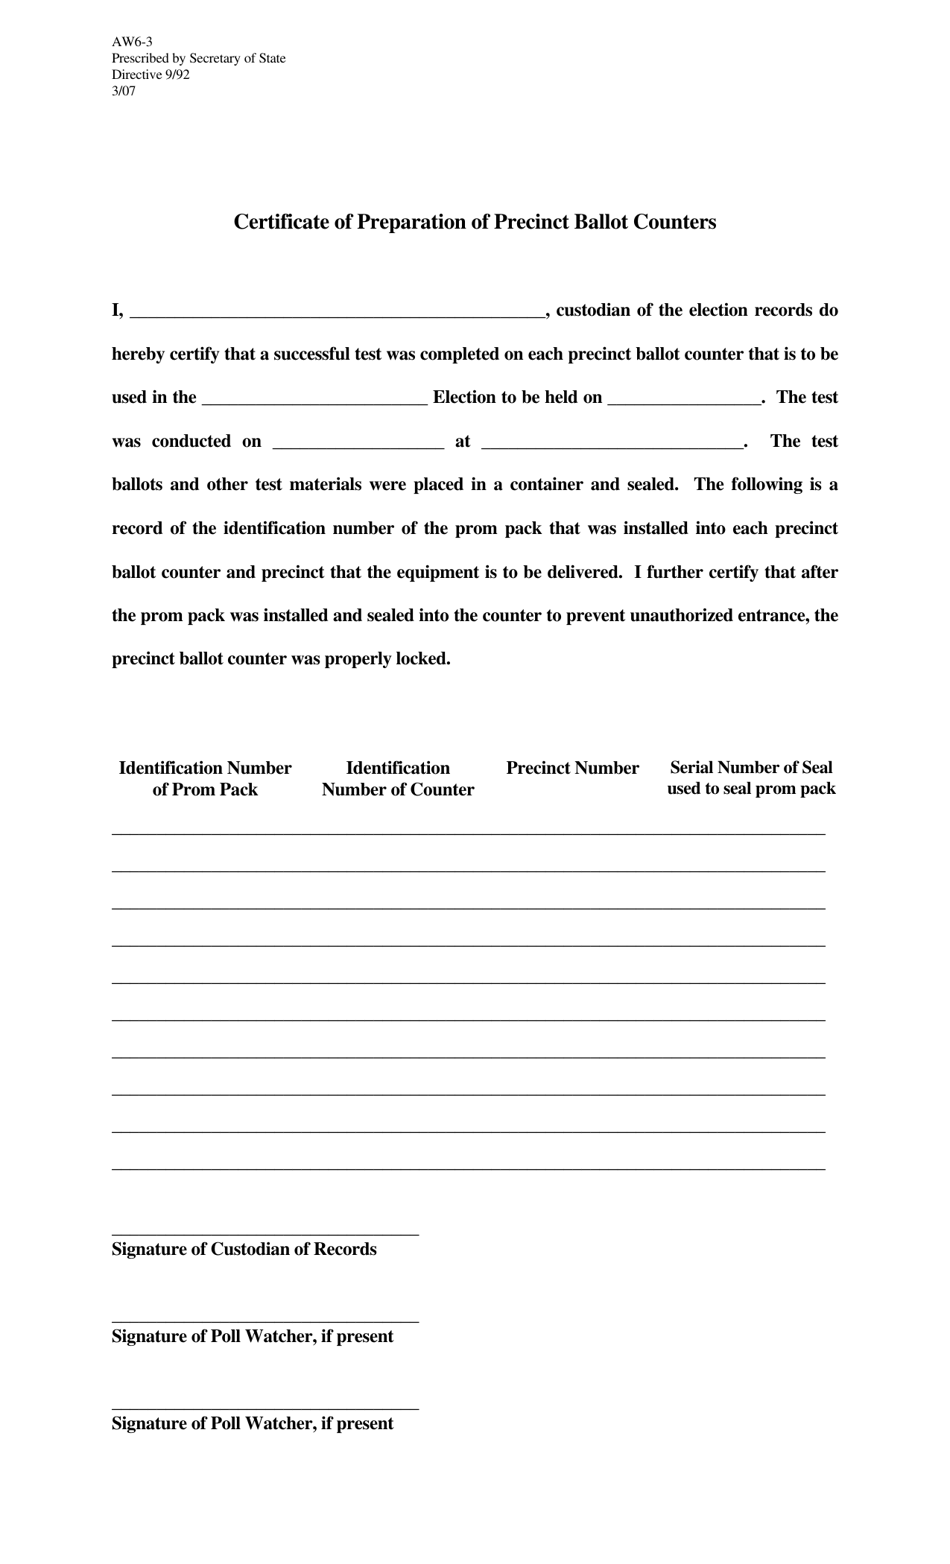 Form AW6-3 Certificate of Preparation of Precinct Ballot Counters - Texas, Page 1